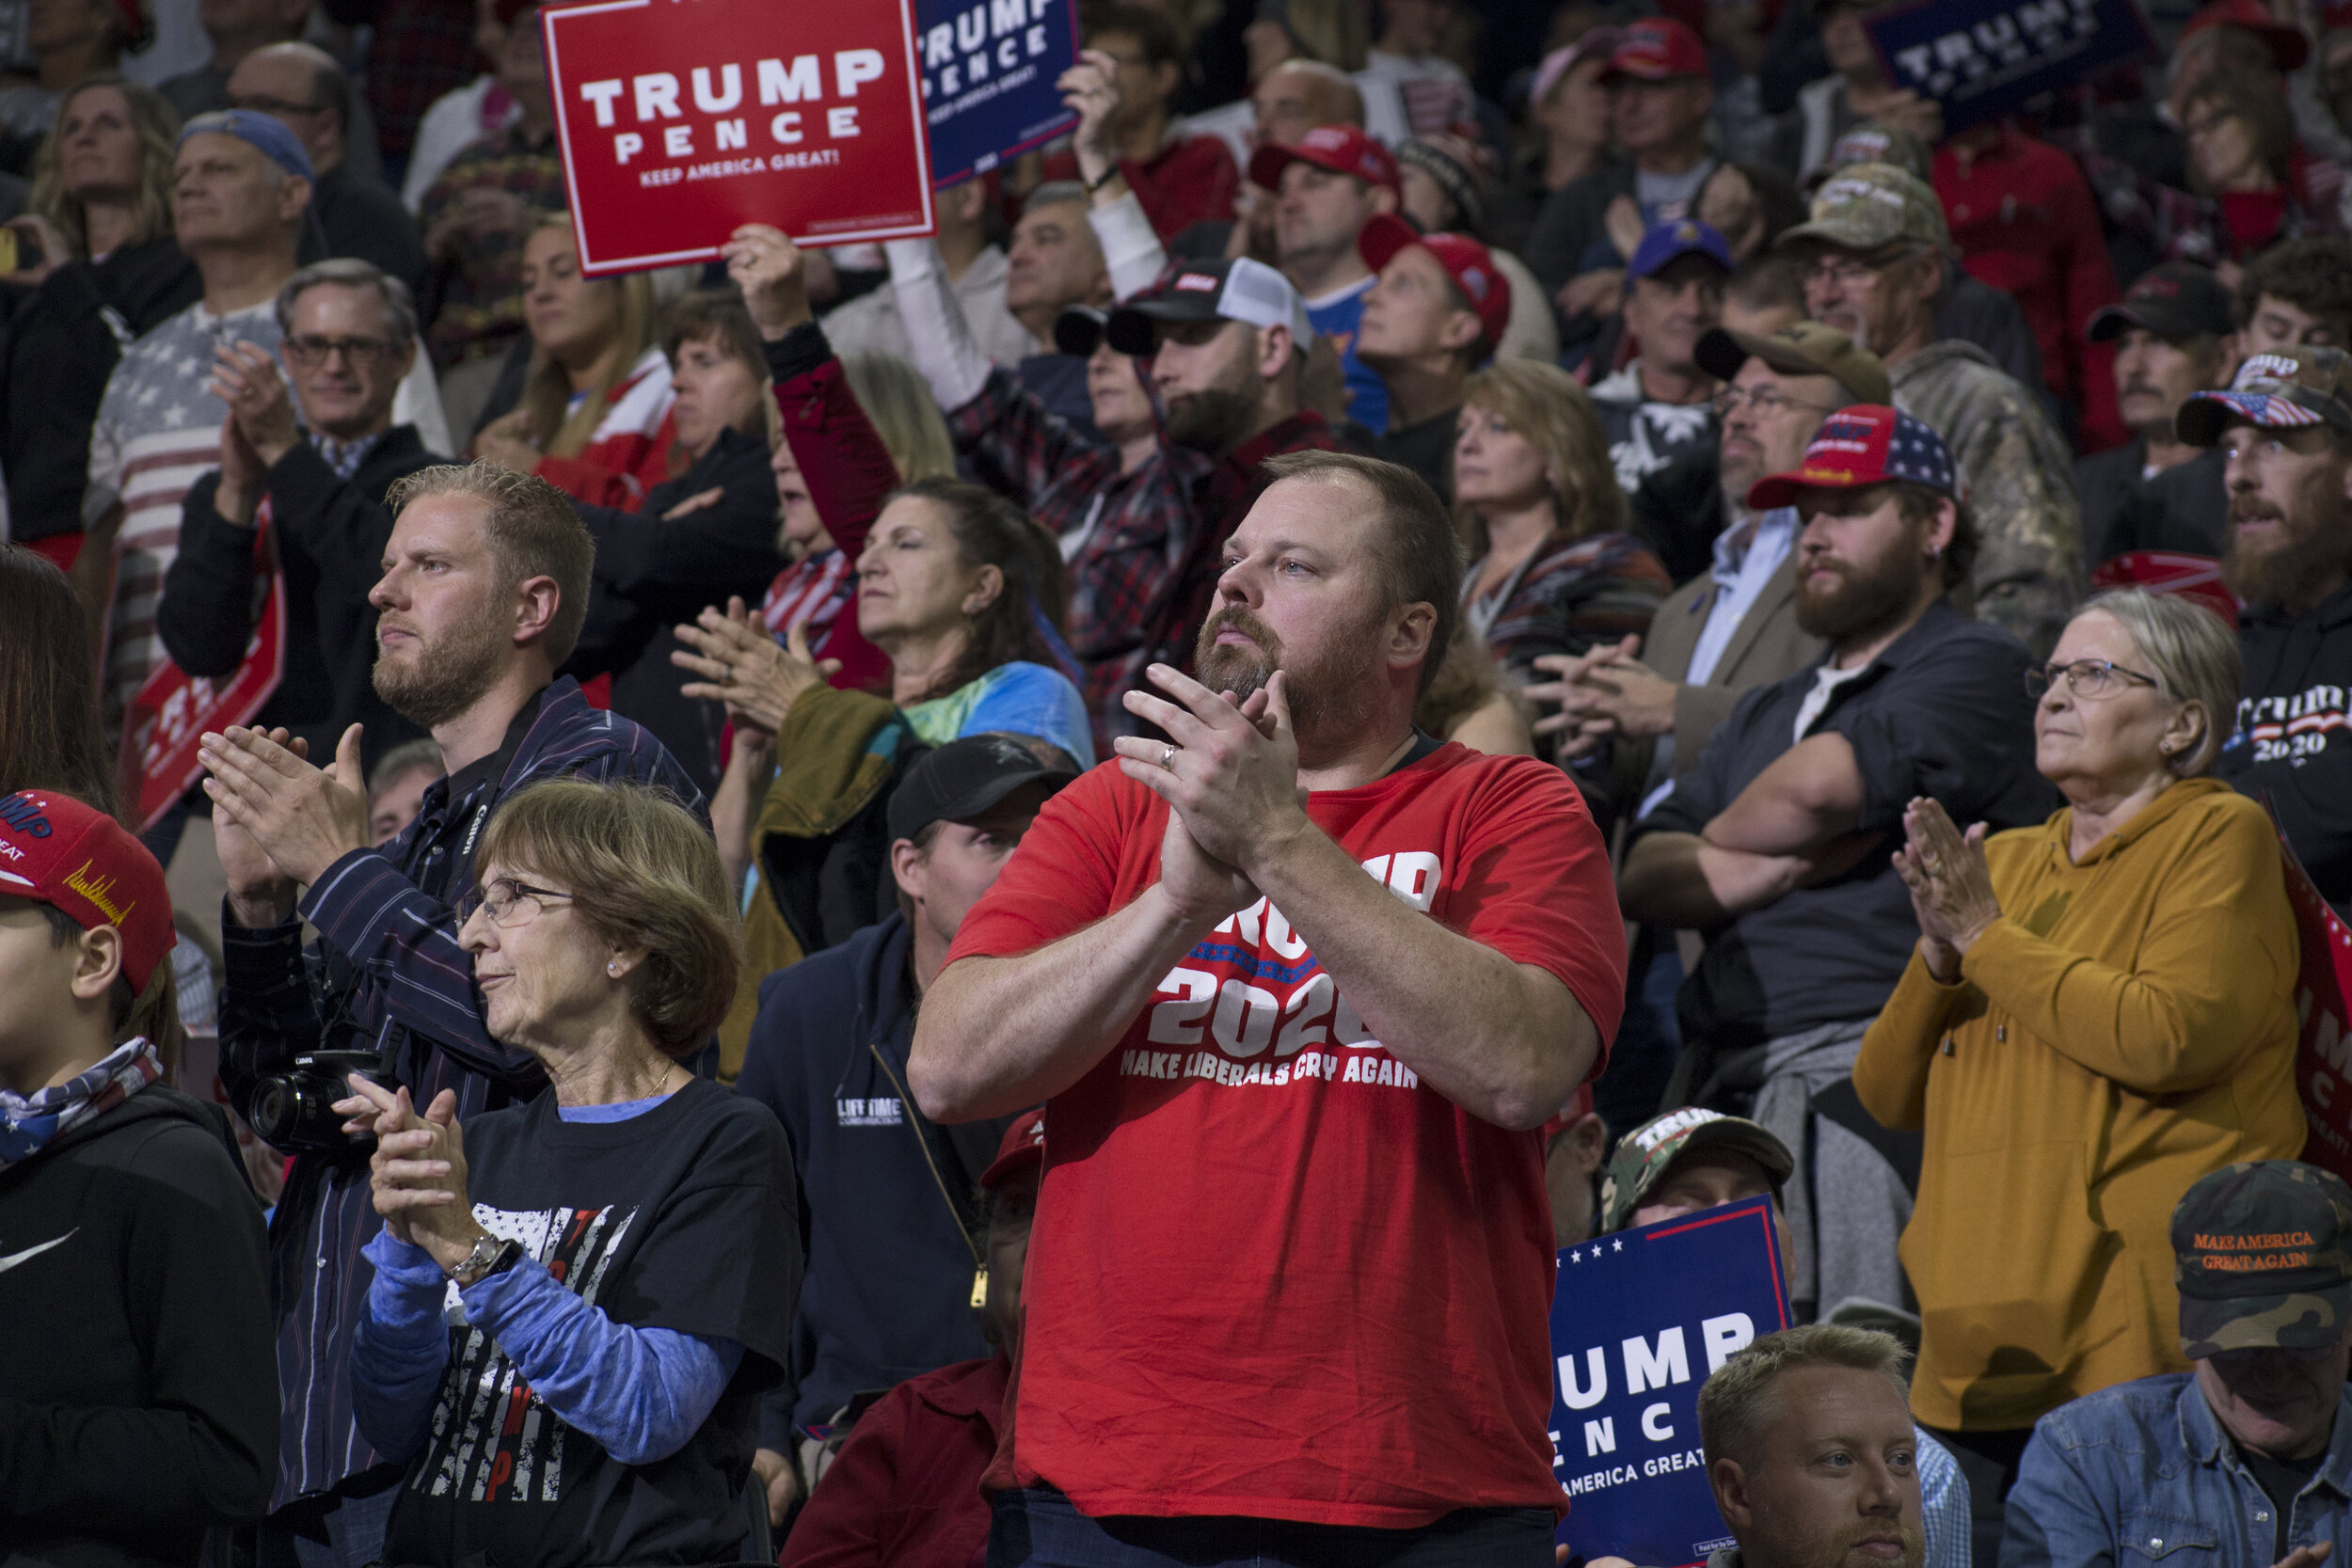  October 10, 2019 - Minneapolis, Minnesota, United States: Trump supporters fill the Target Center in Minneapolis on Thursday, Oct. 10, 2019. An estimated 20,000 people attended the rally in support of the president. (Brooklynn Kascel/Polaris) 